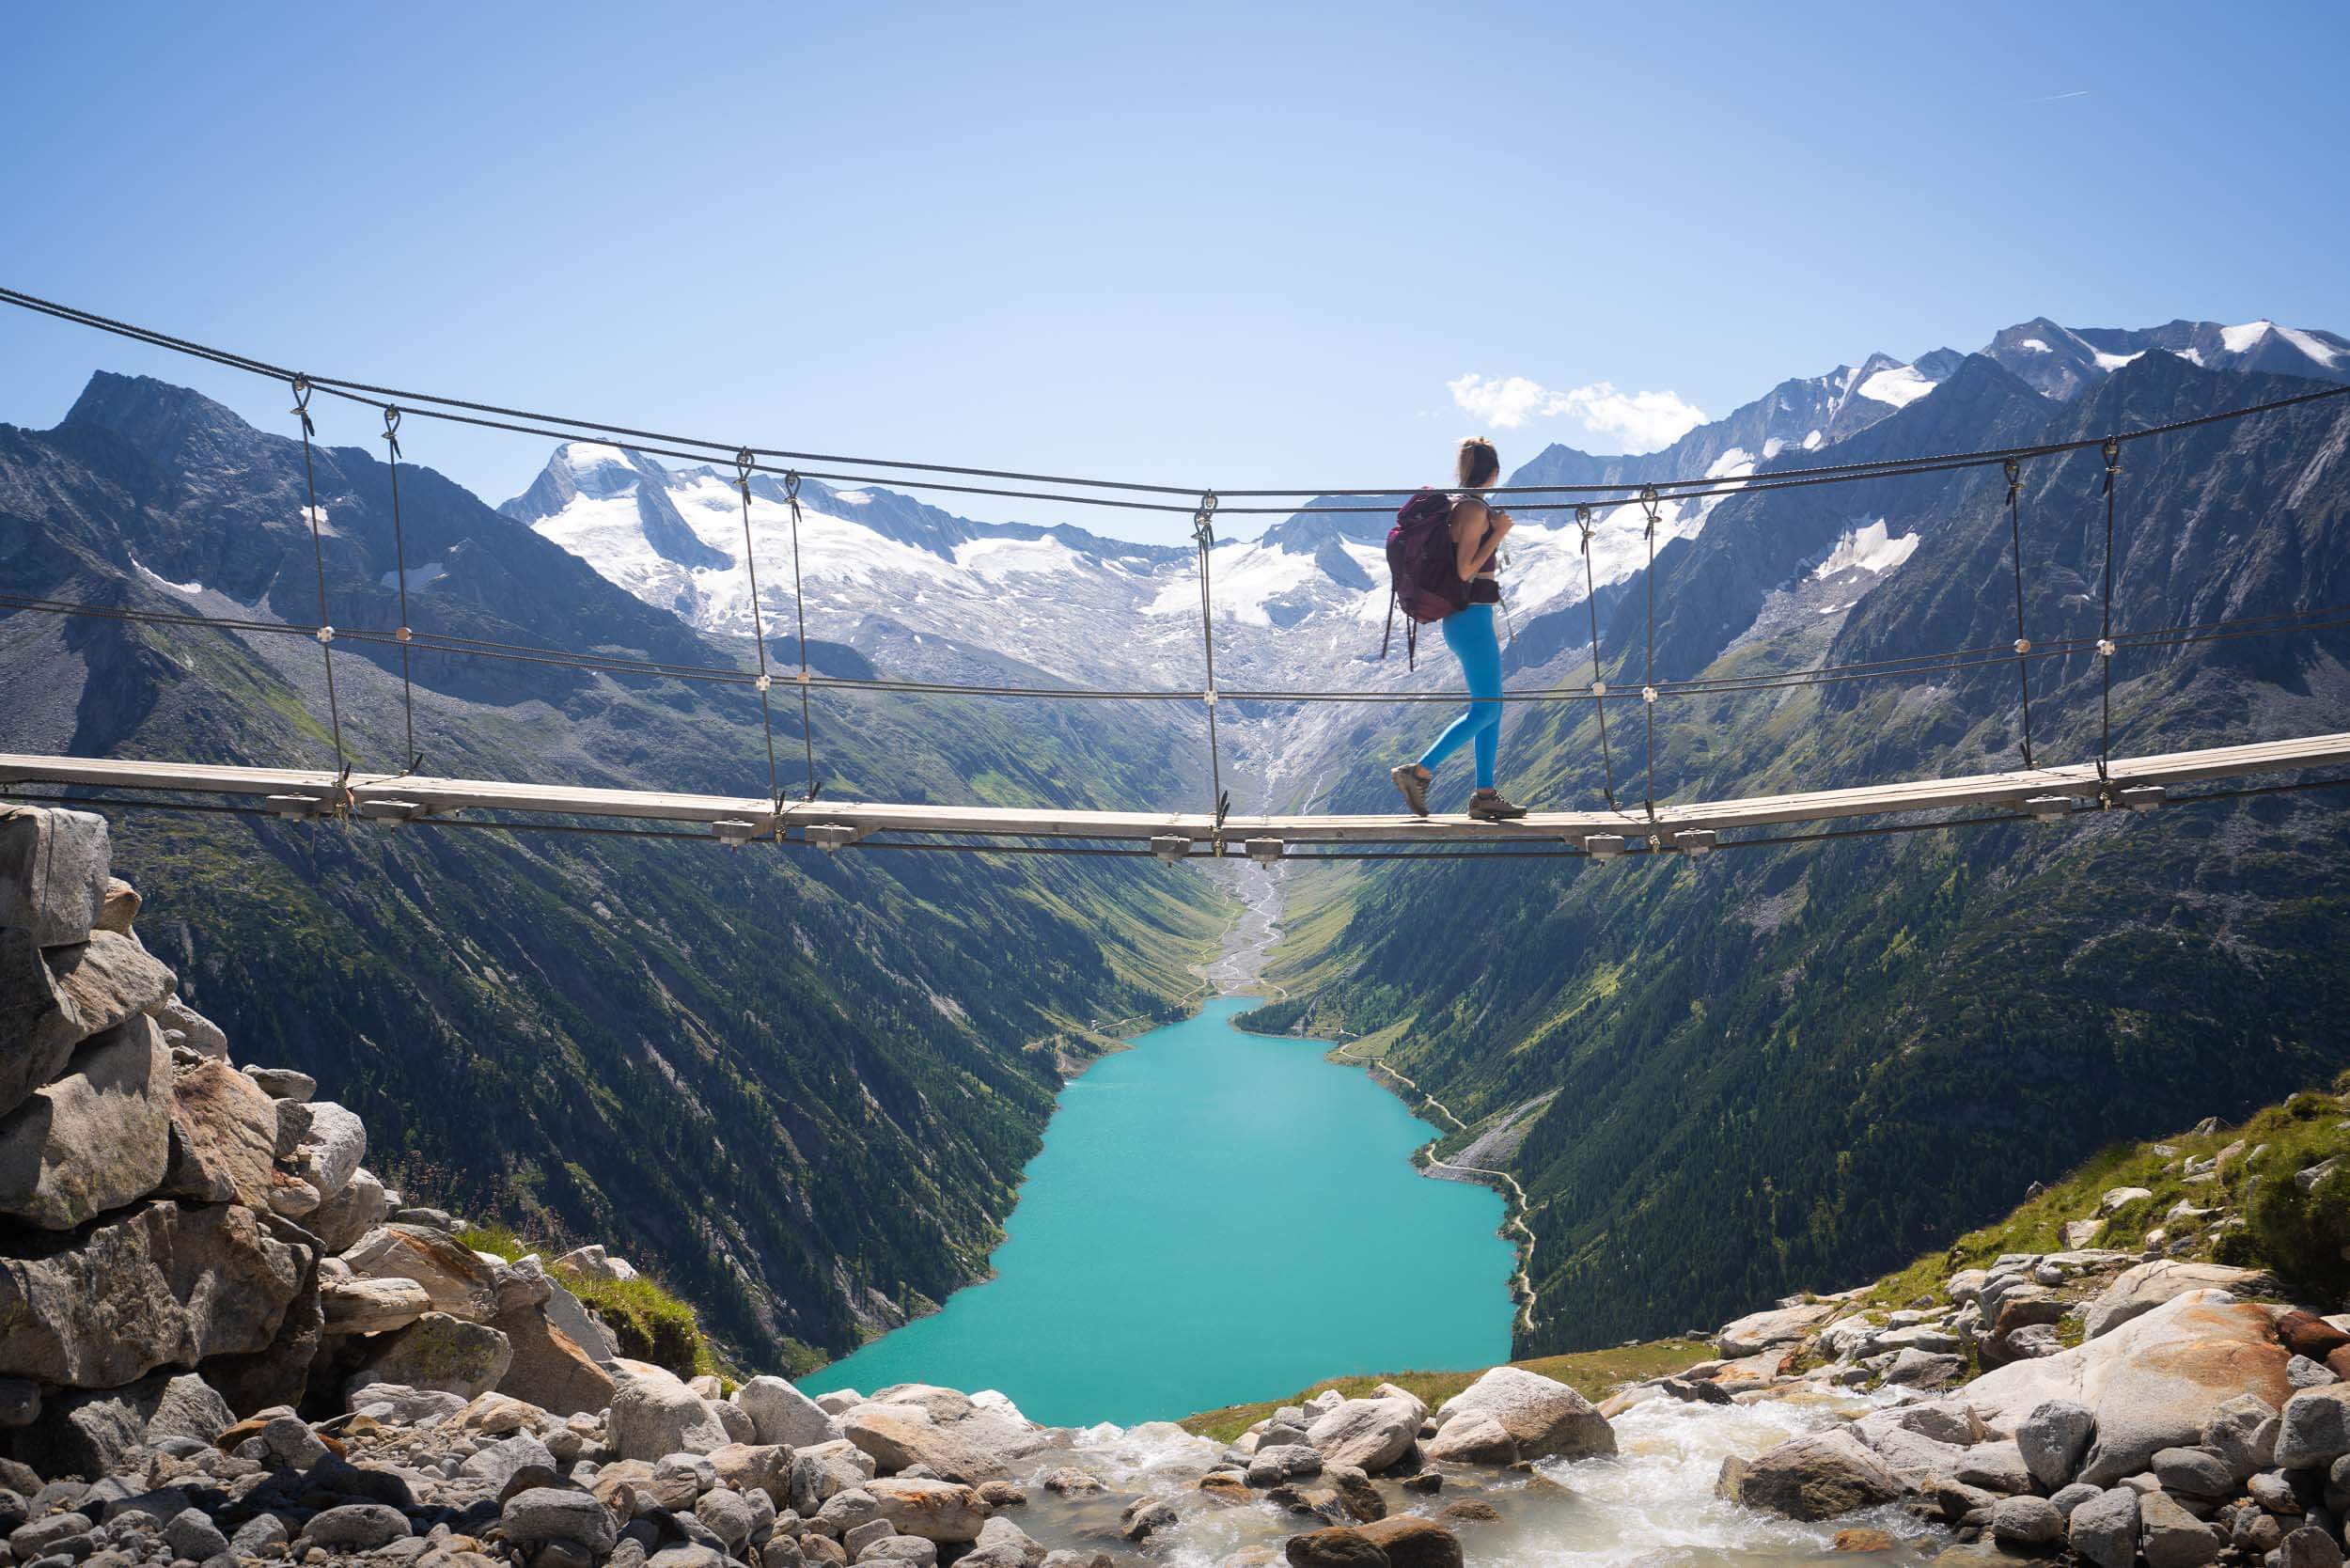 The small suspension bridge up above Olpererhütte has become a popular photo-op in the Austrian Alps.